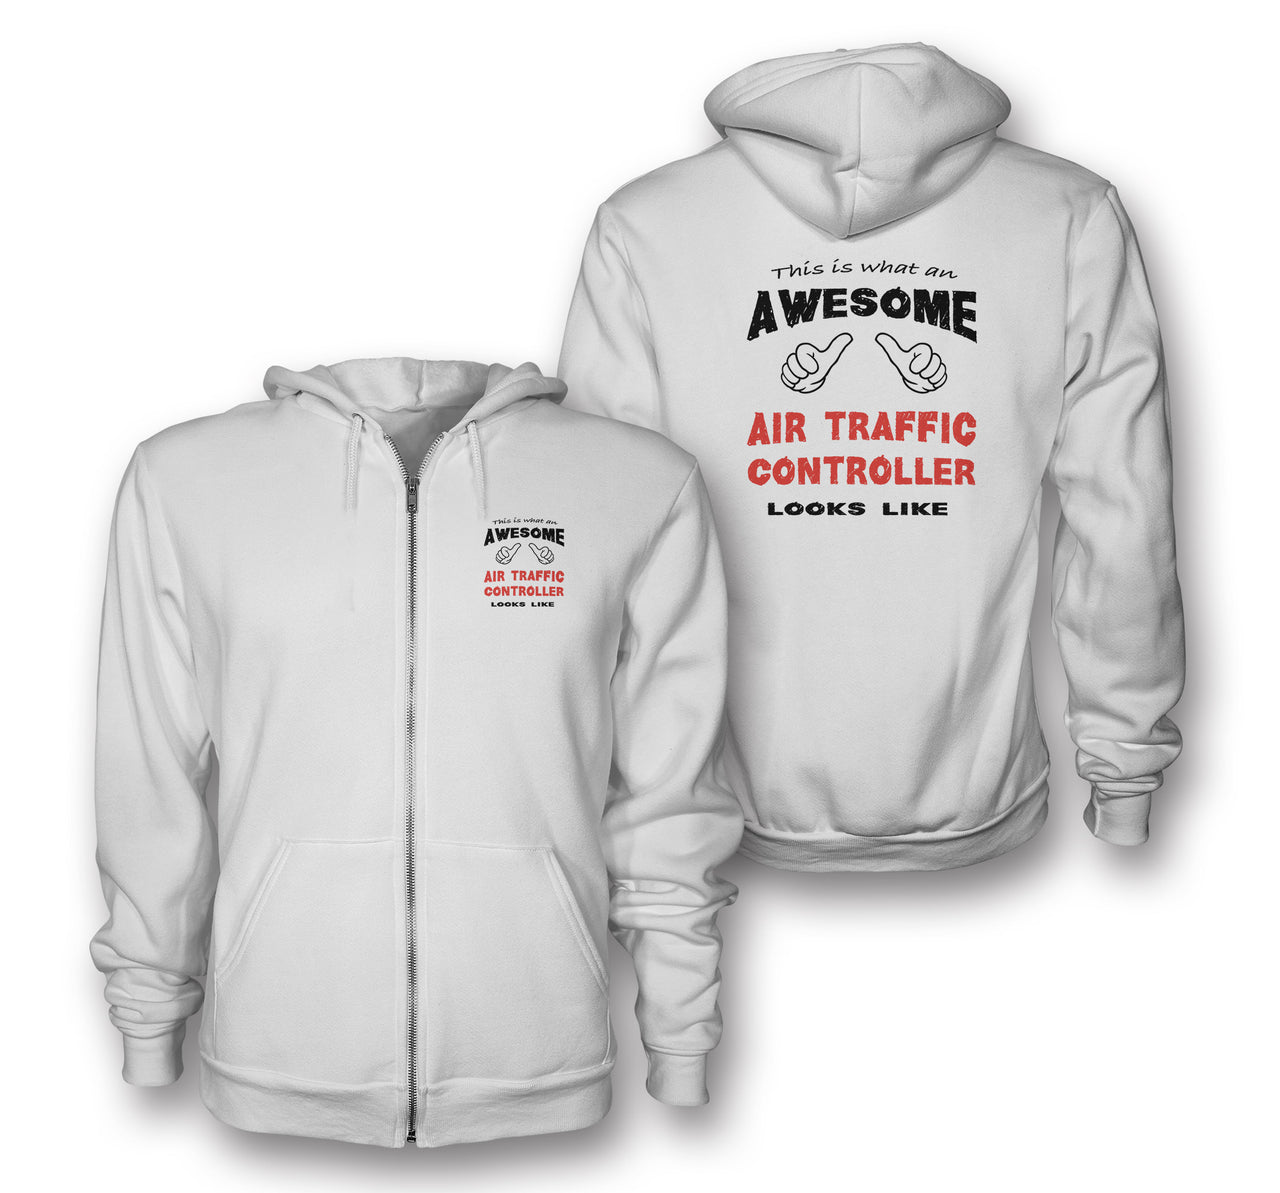 This is What an Awesome Air Traffic Controller Look Like Designed Zipped Hoodies